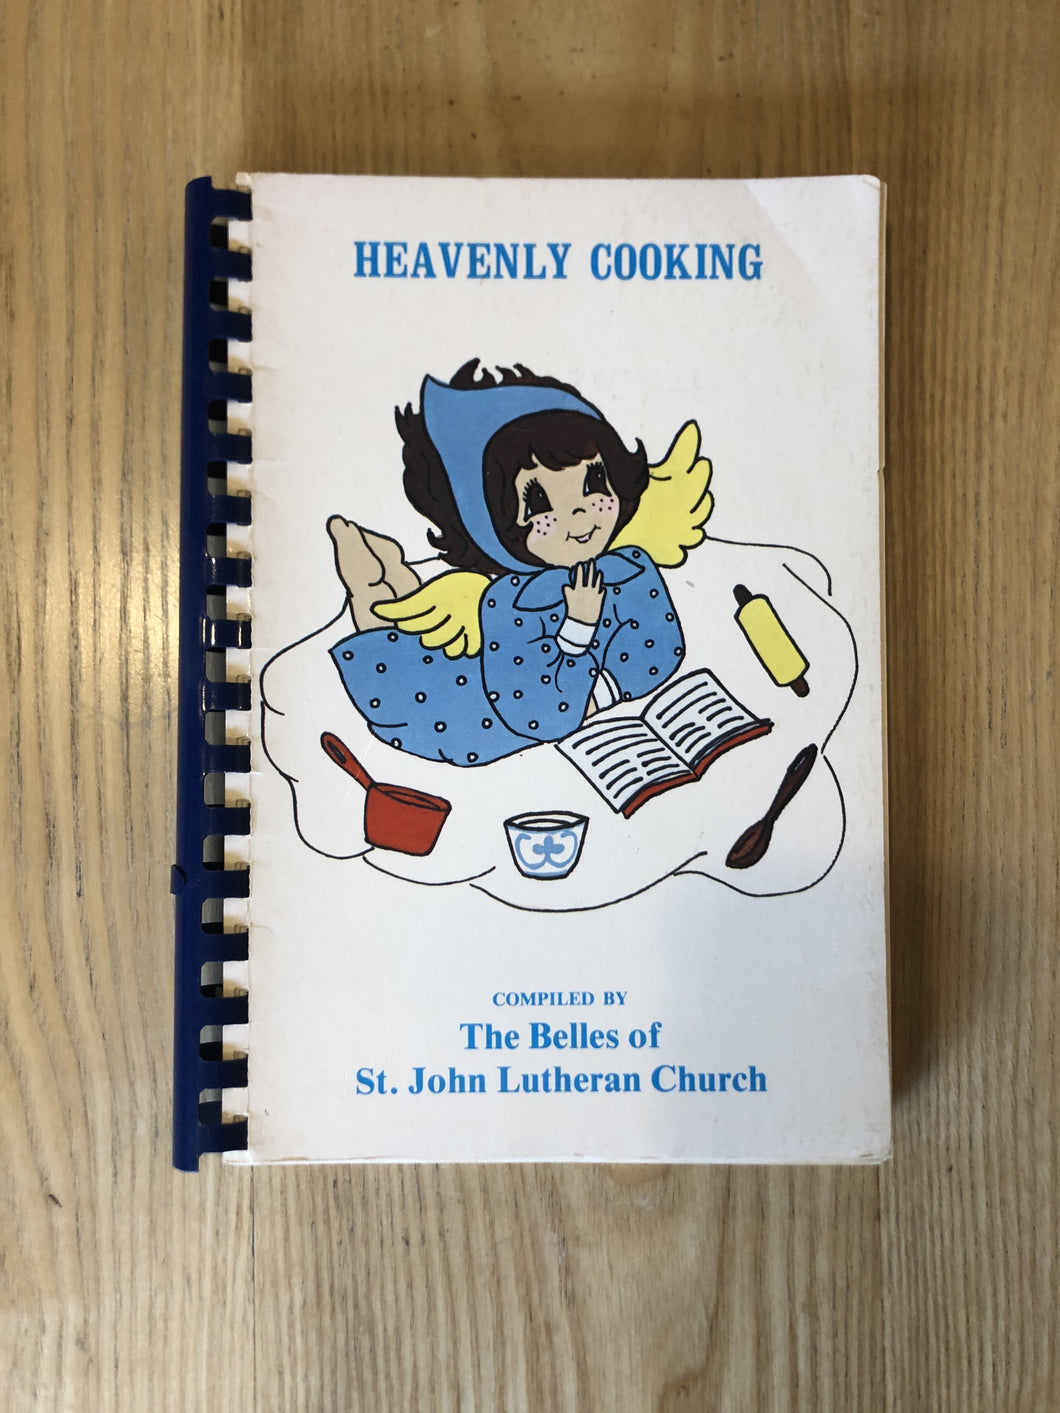 Heavenly Cooking, Compiled by the Belles of St. John Lutheran Church